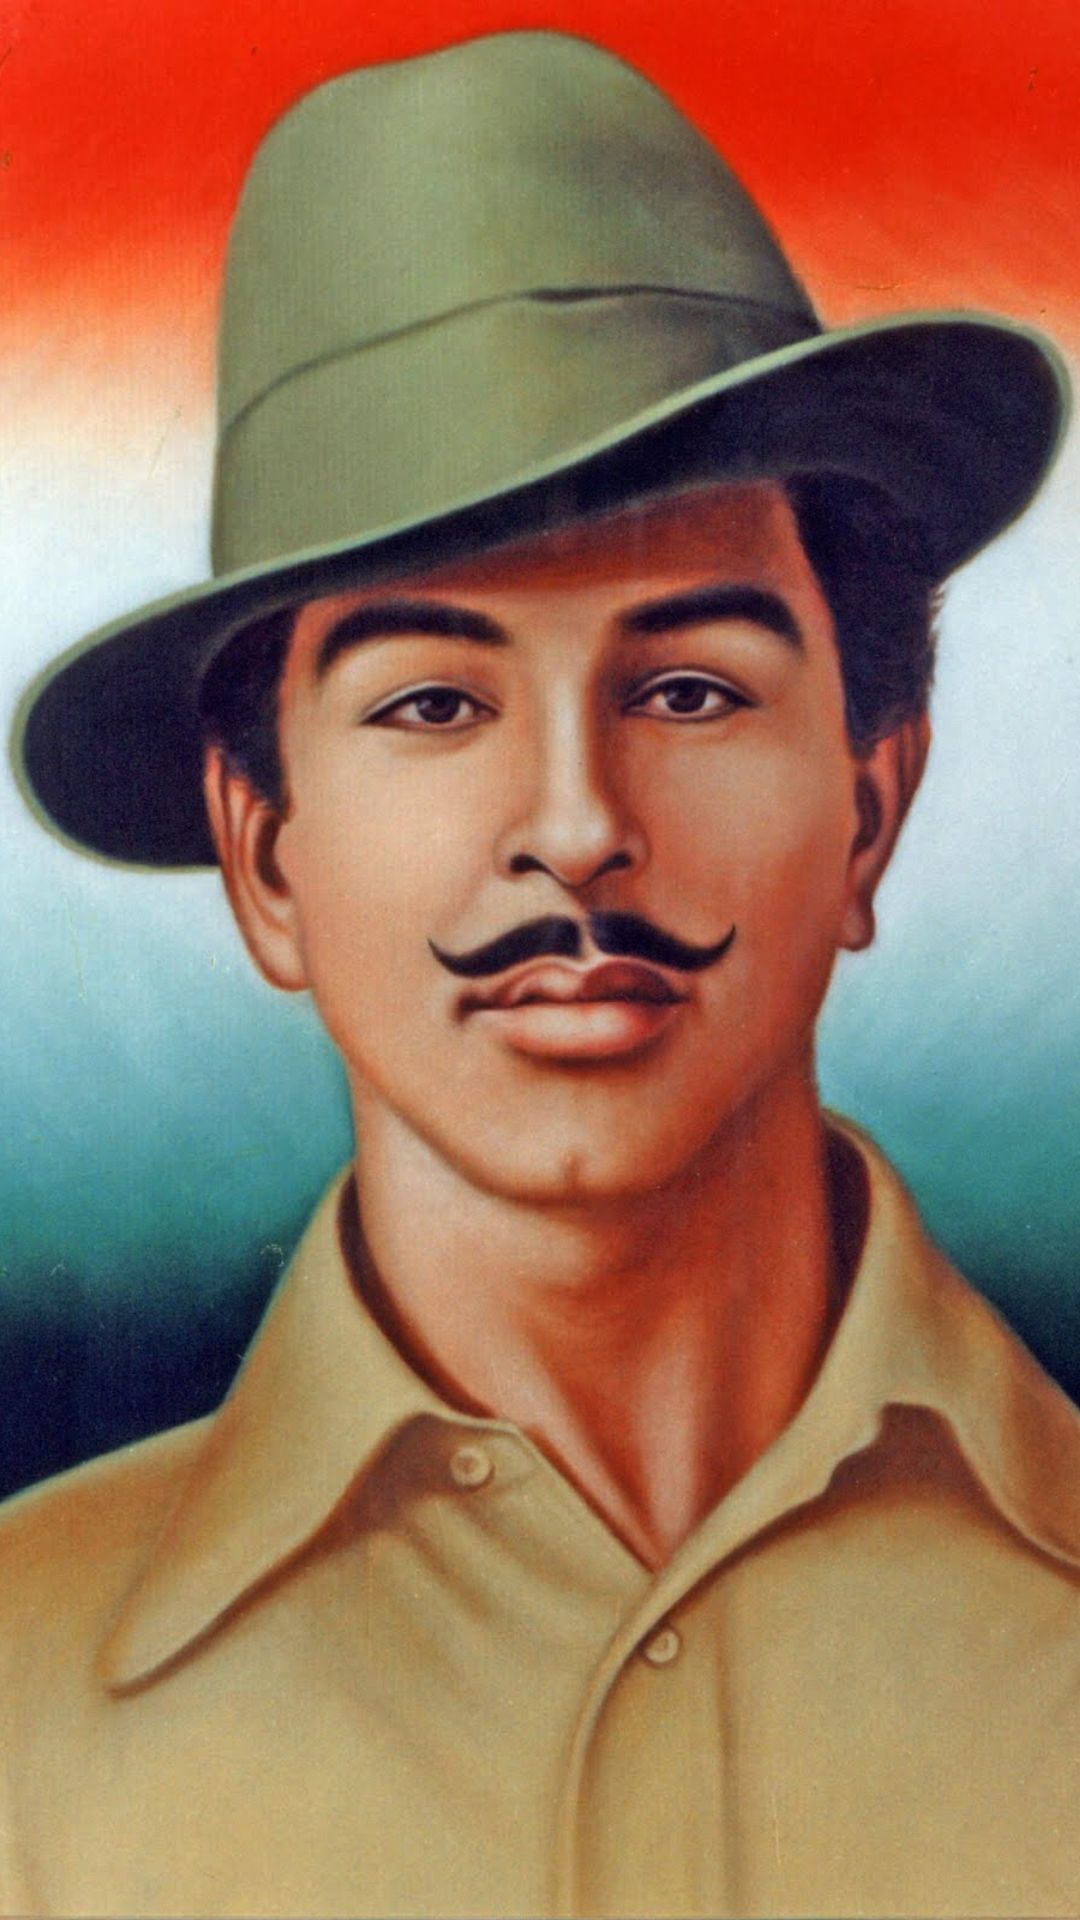 Bhagat Singh iPhone Wallpapers -Top 25 Best Bhagat Singh iPhone Wallpapers  - Getty Wallpapers